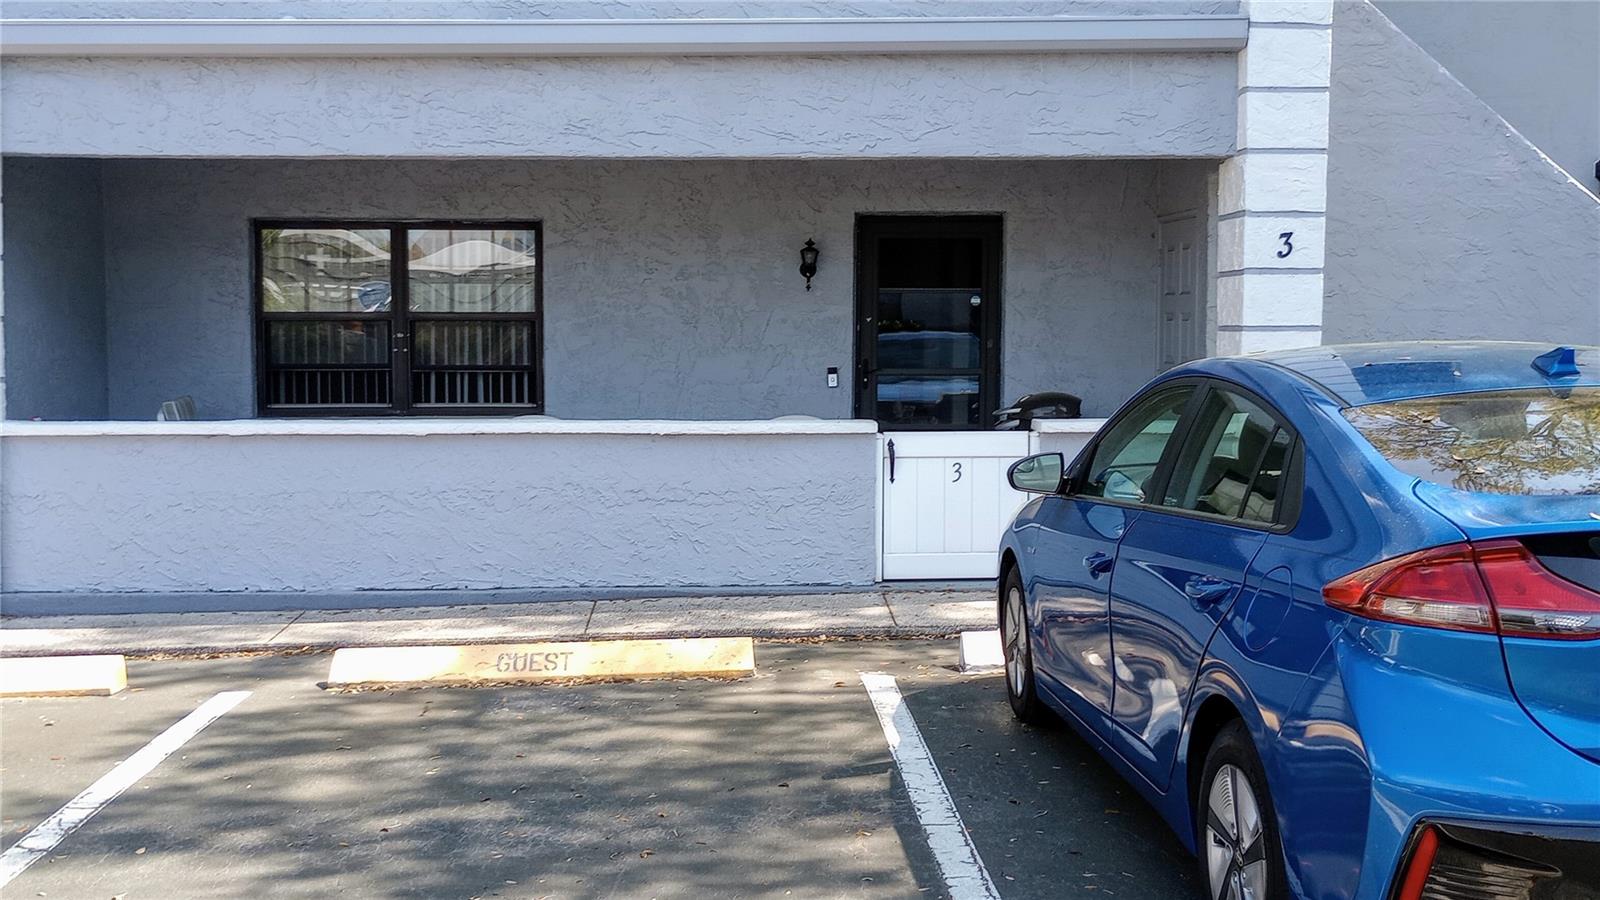 front of home with parking space- blue car